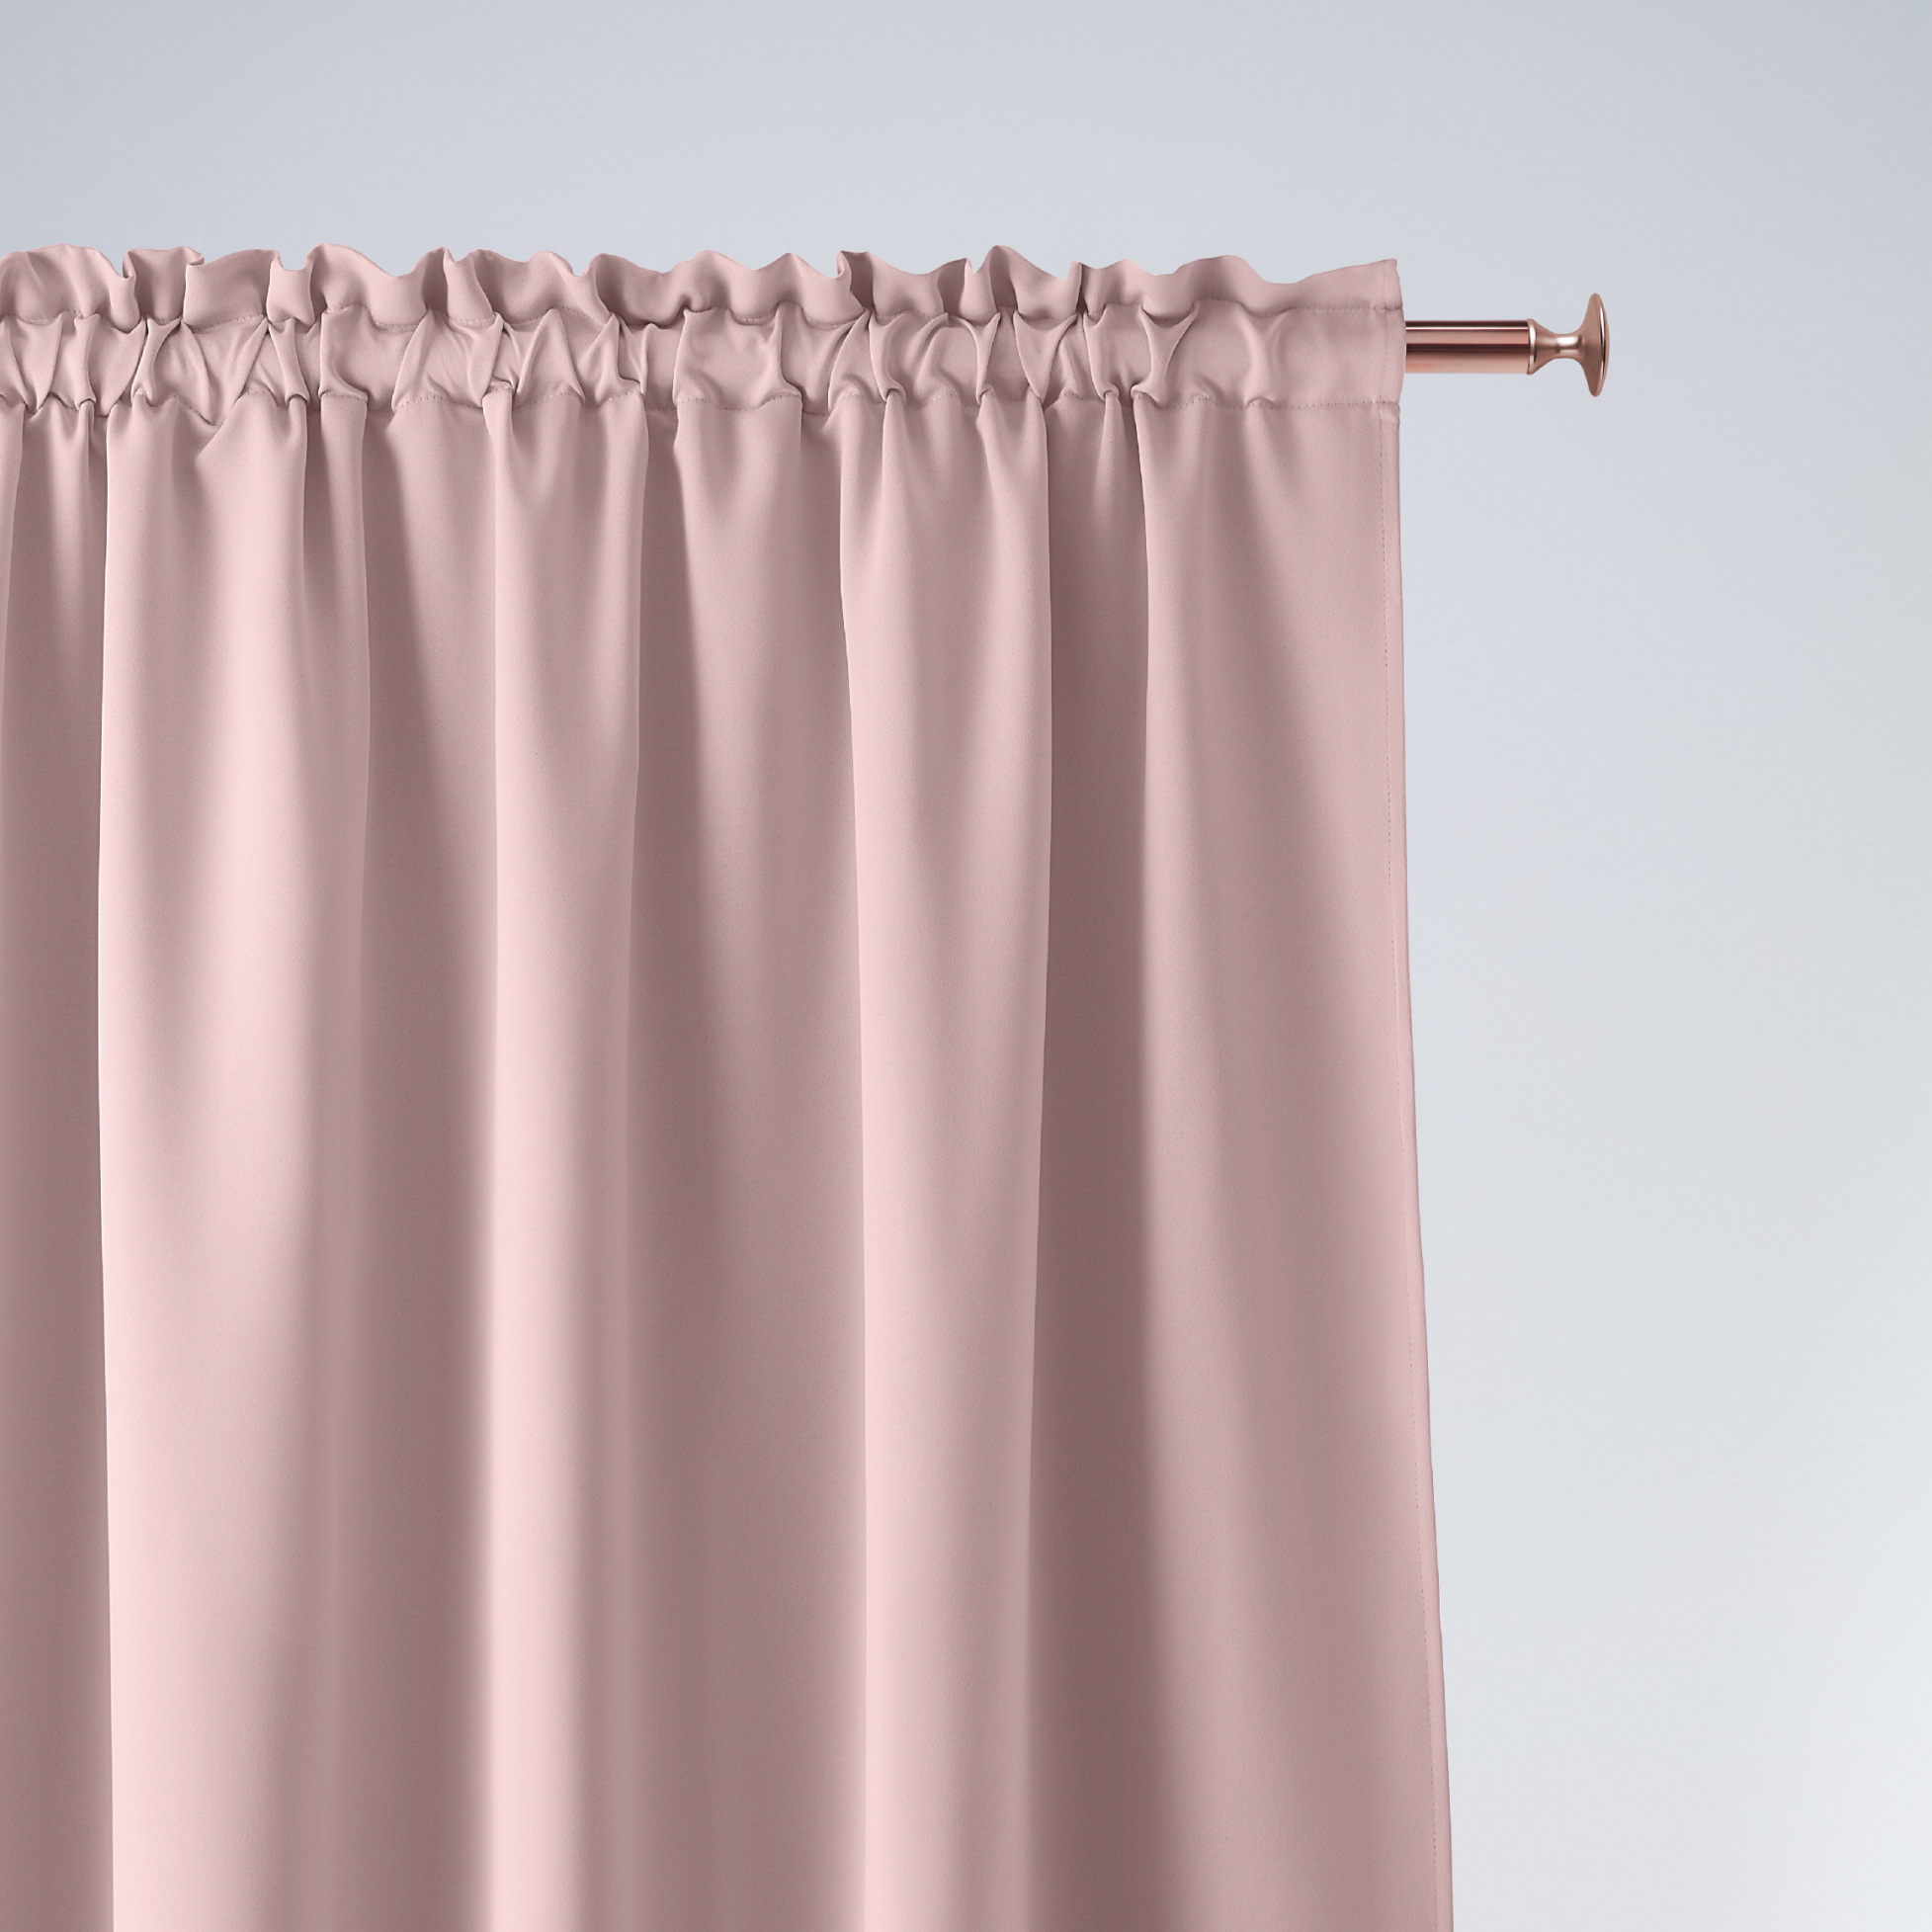 Fine curtain in powder pink color 140 x 250 cm